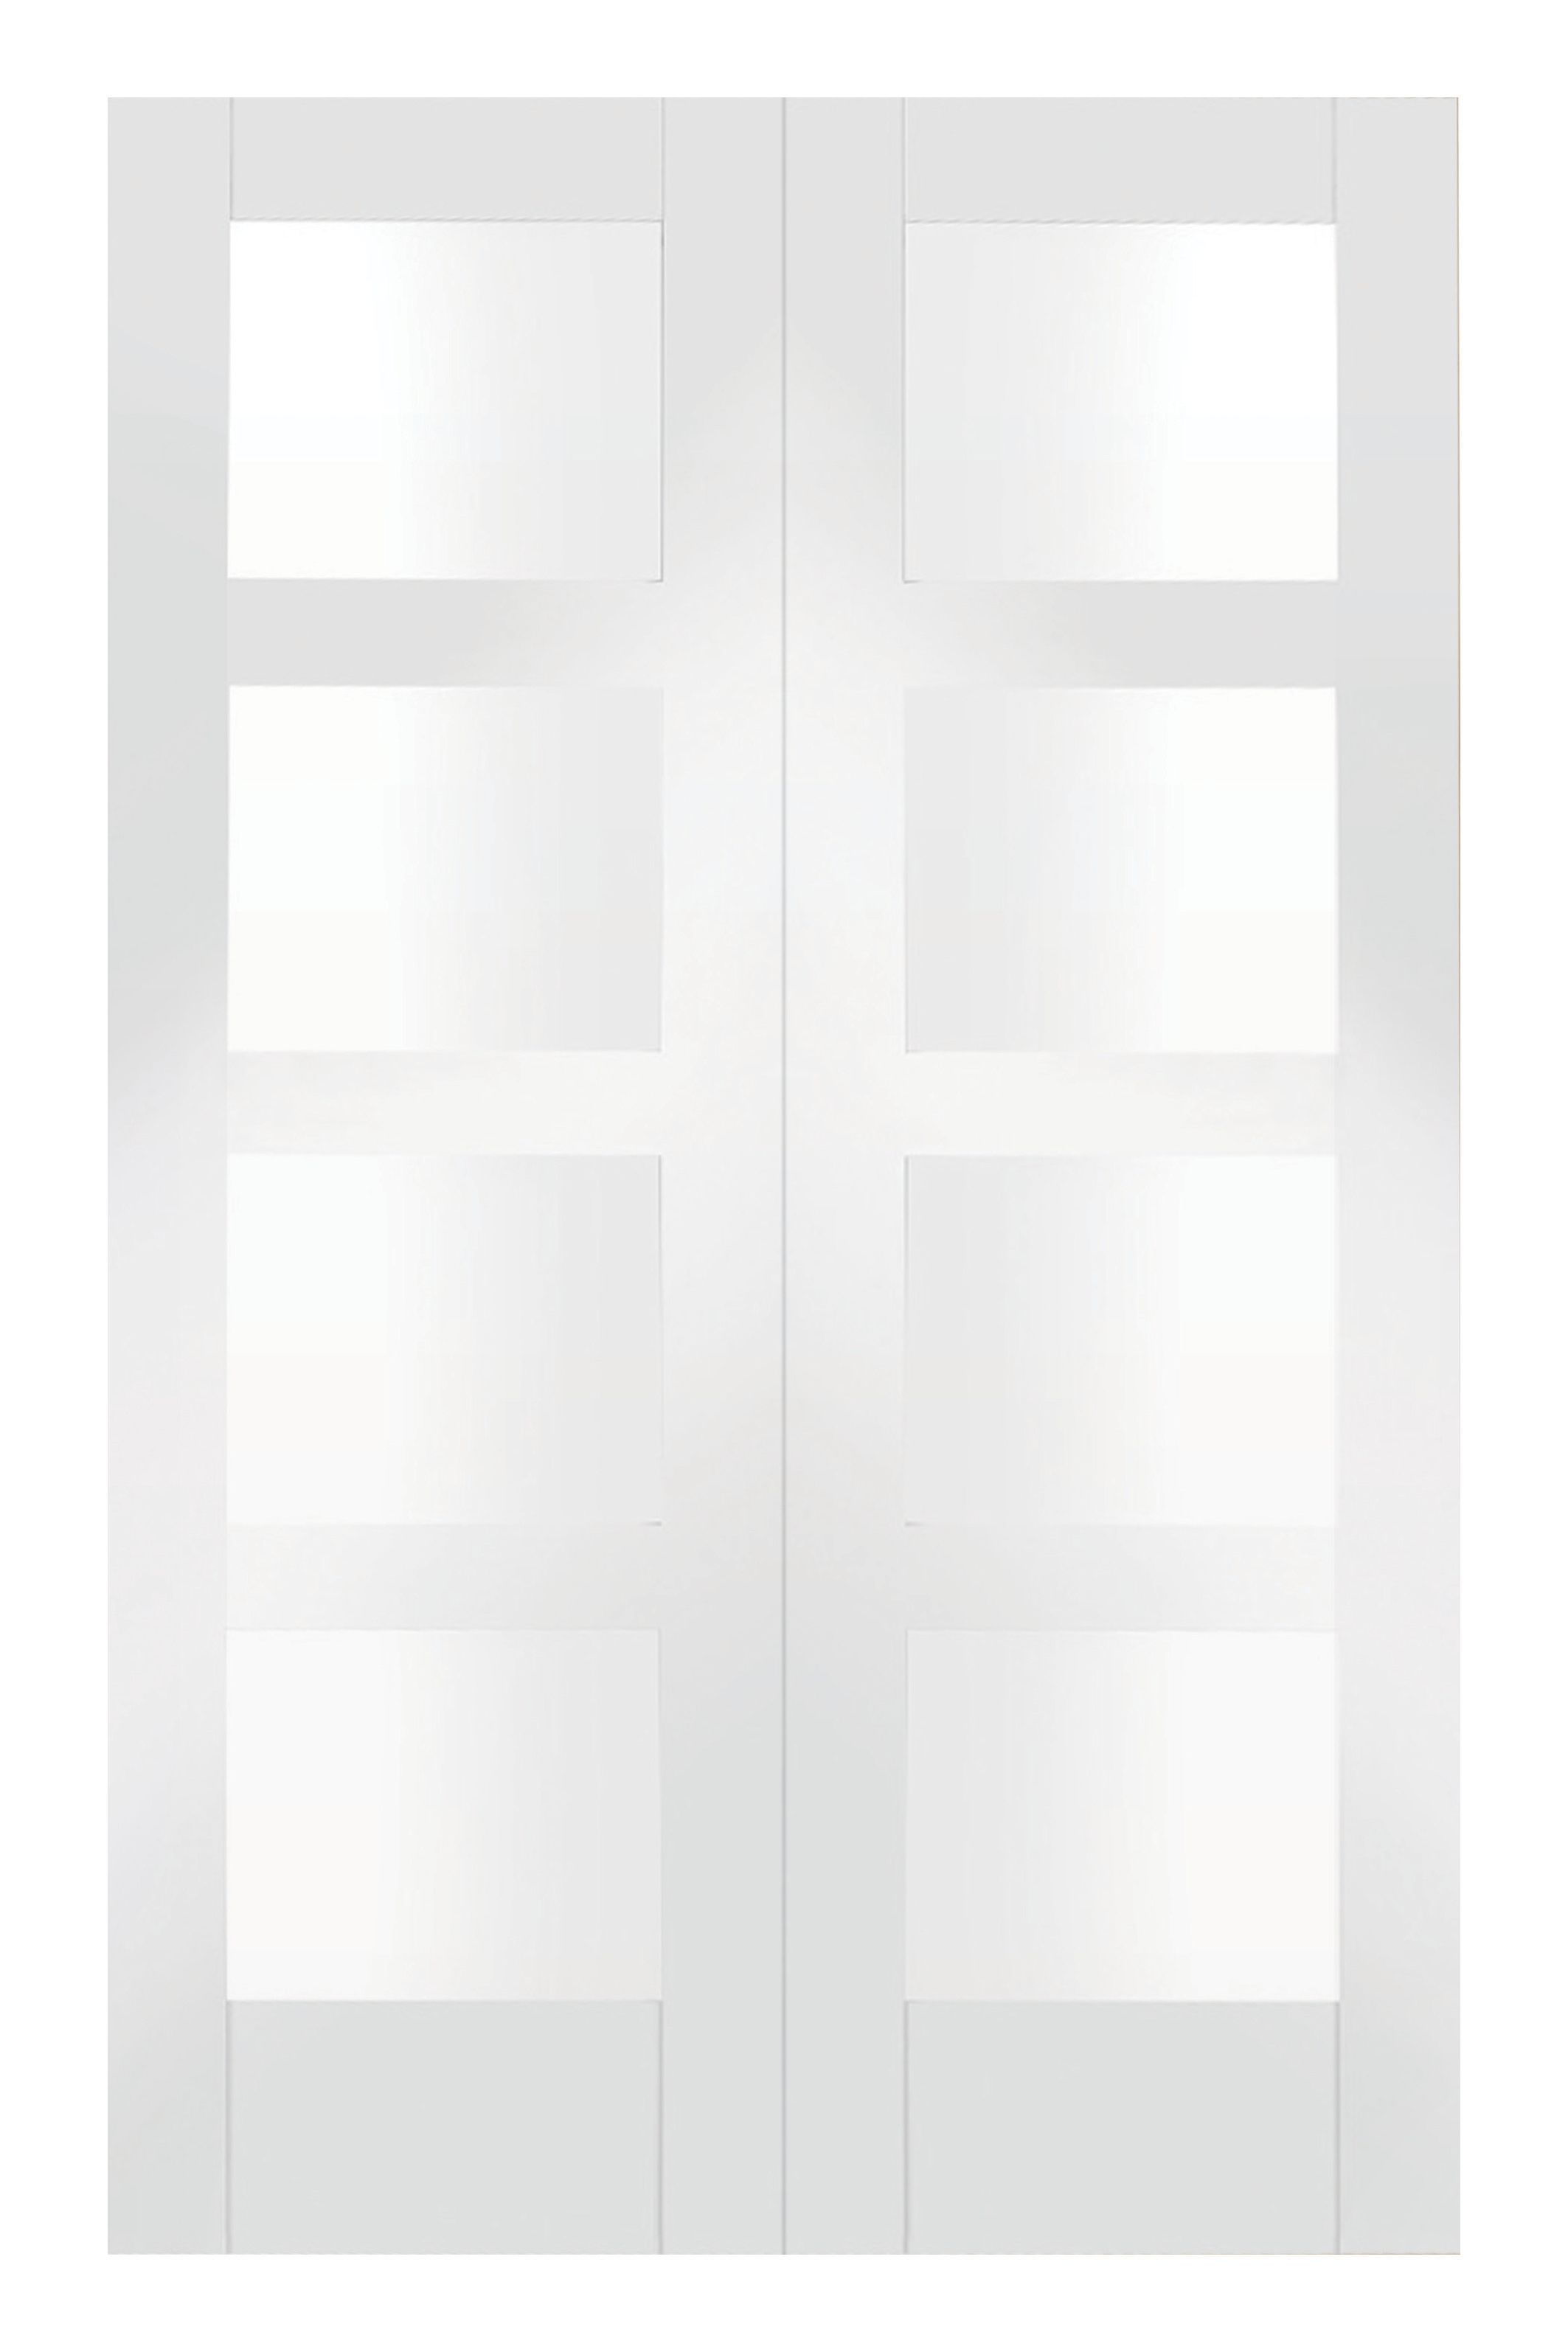 Wickes Barton White Fully Glazed MDF 4 Panel Rebated French Doors - 1981 x 1372mm